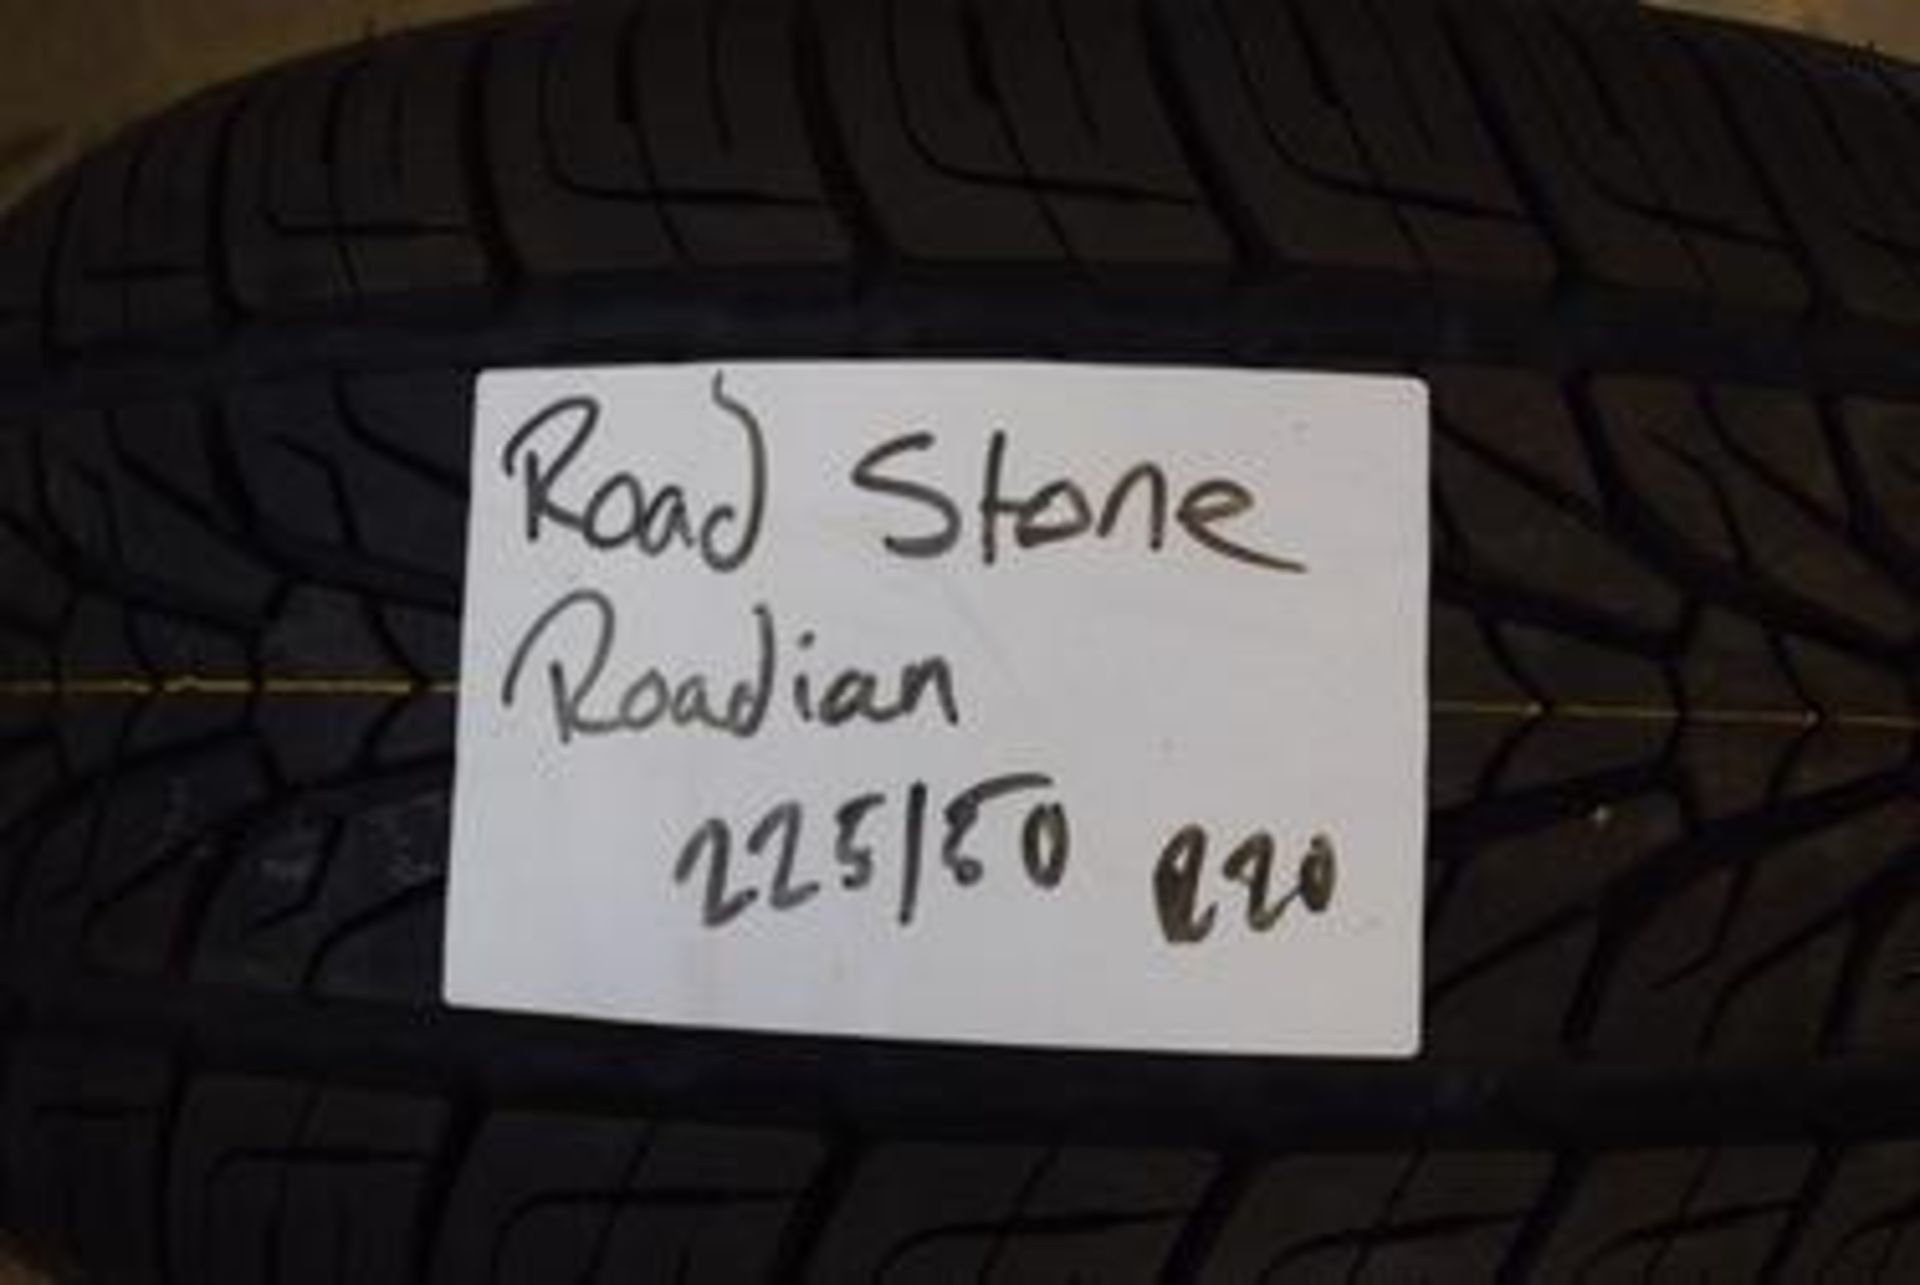 1 x Roadstone Roadian tyre, size 255/50R20 109V - New with label (pallet 1)